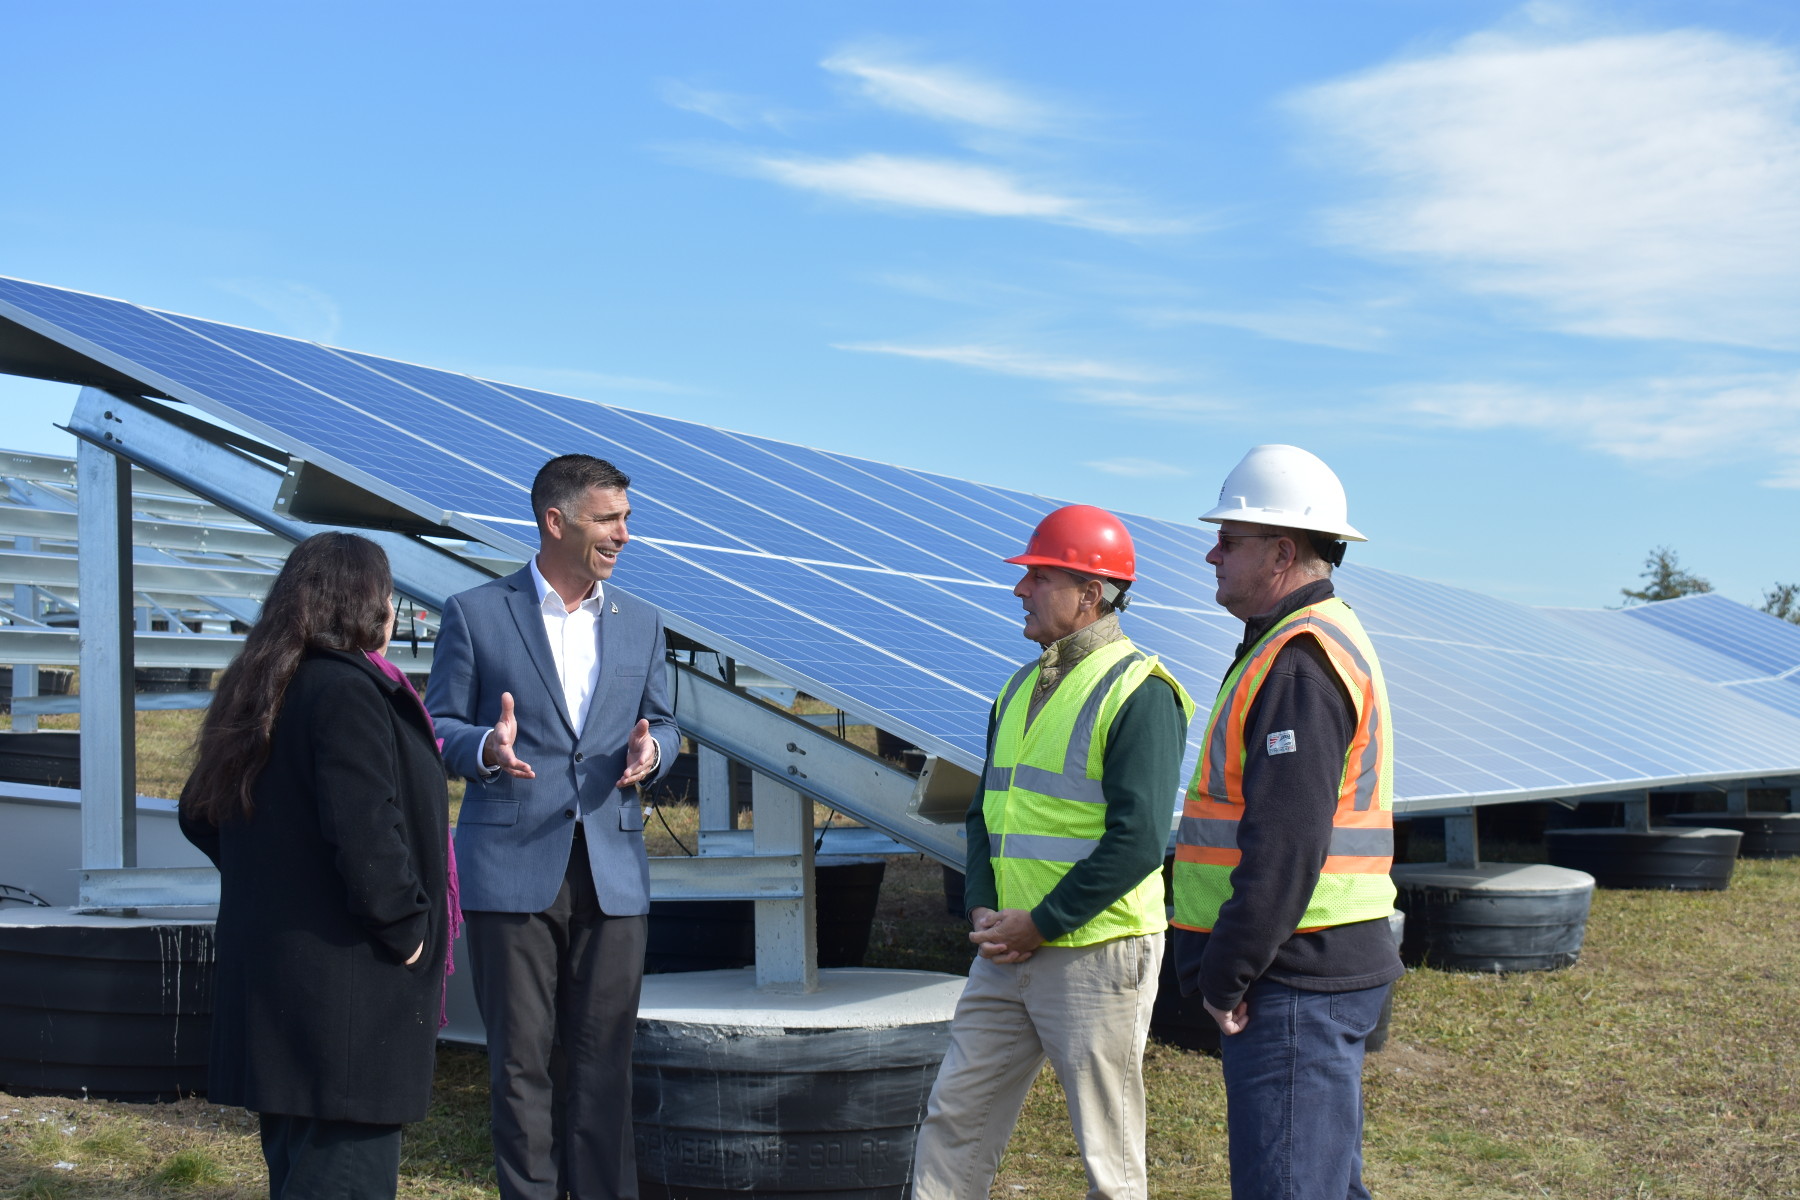 County Executive Mike Hein Visits Construction Of Utility Scale Solar